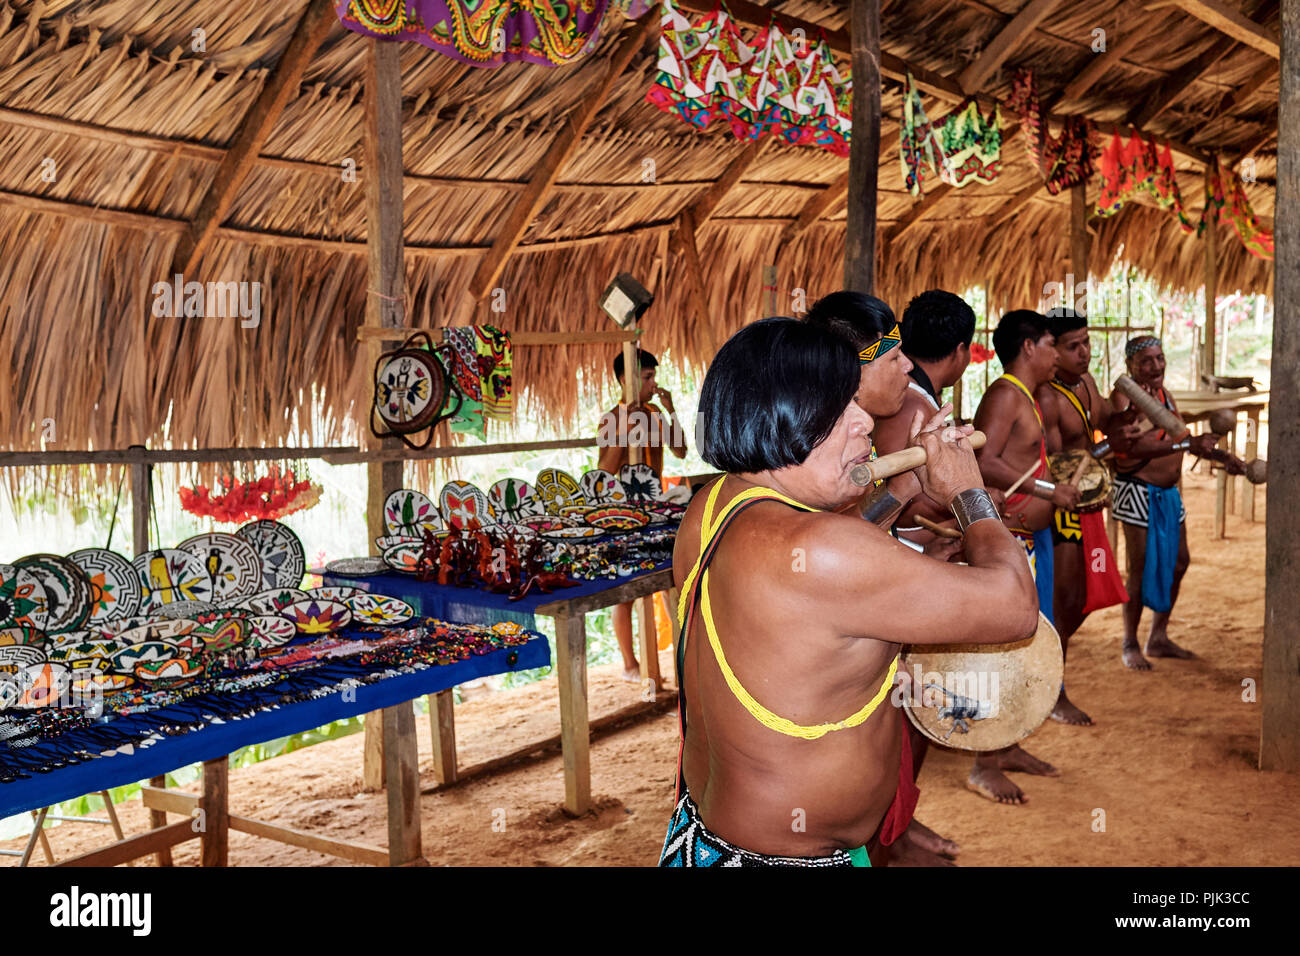 Chagres National Park, Panama - April 22, 2018: Native Embera people performing authentic music and dances for the visiting tourists Stock Photo